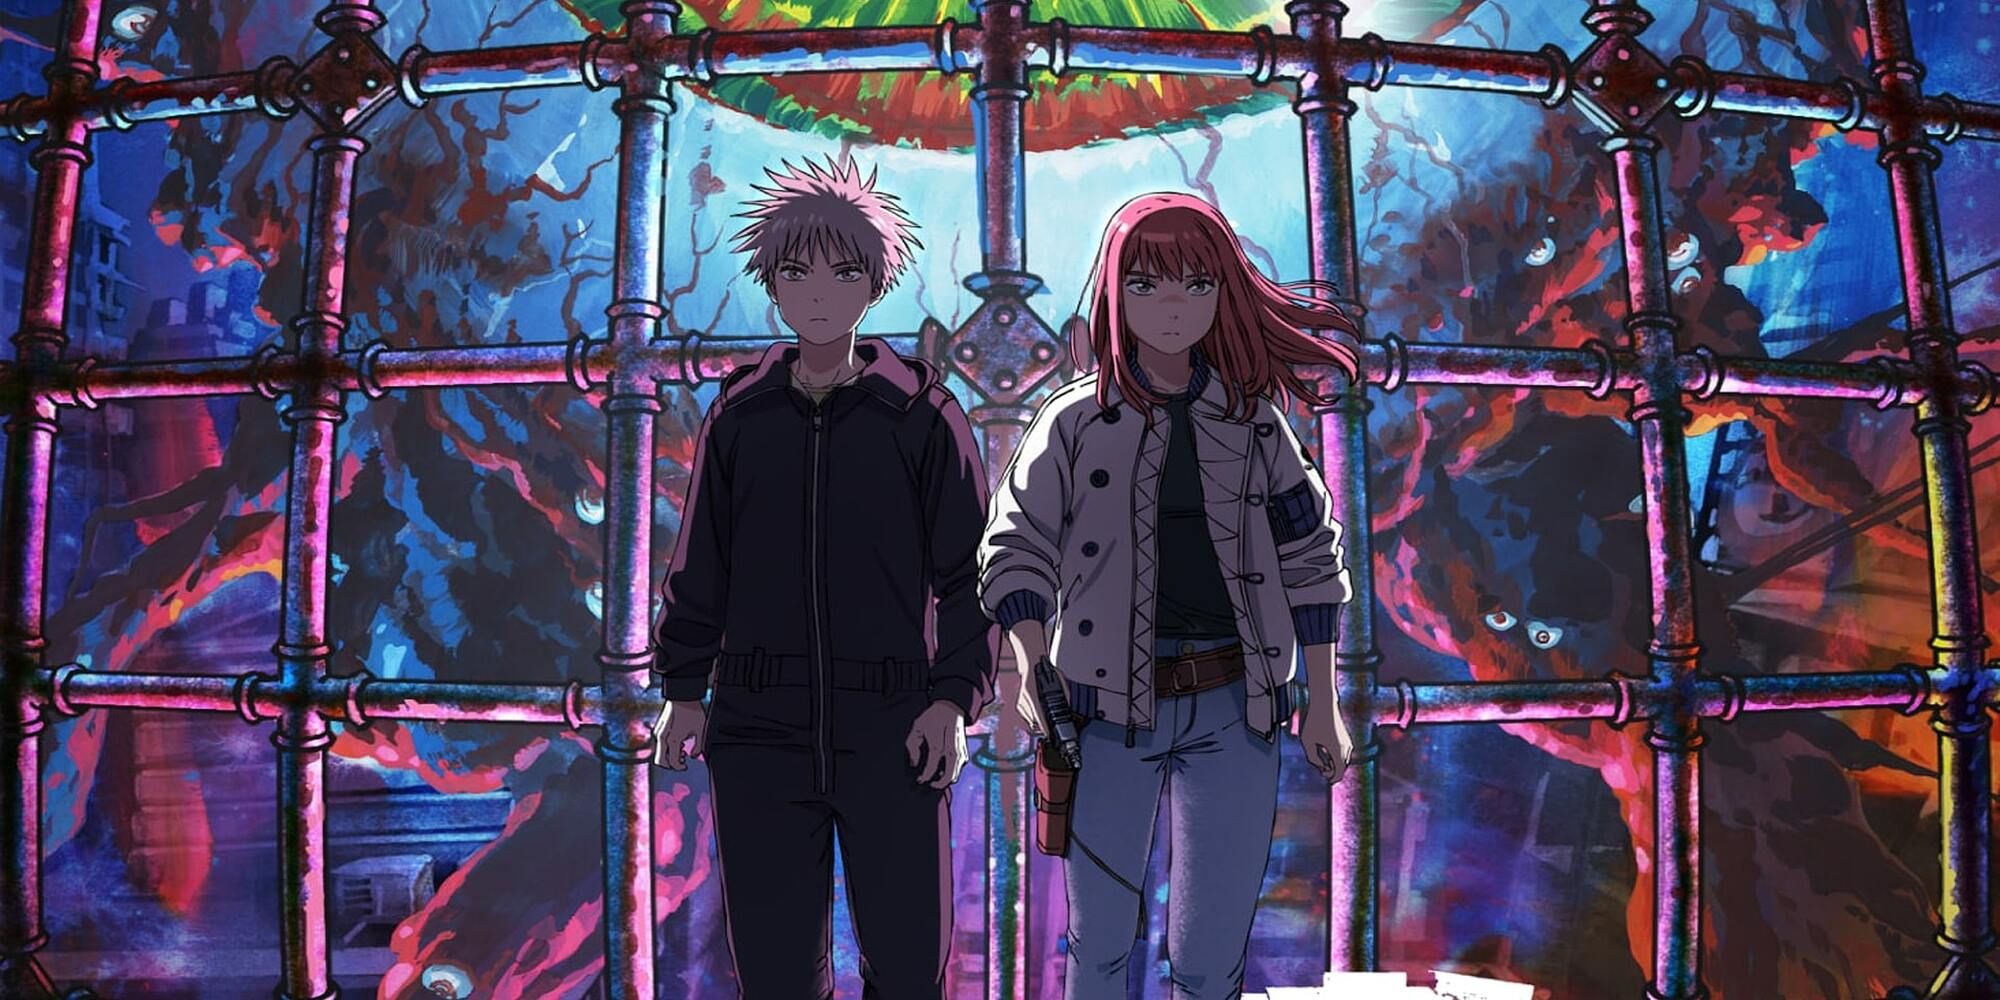 A boy and a girl stand together in front of perpendicular metals bars.